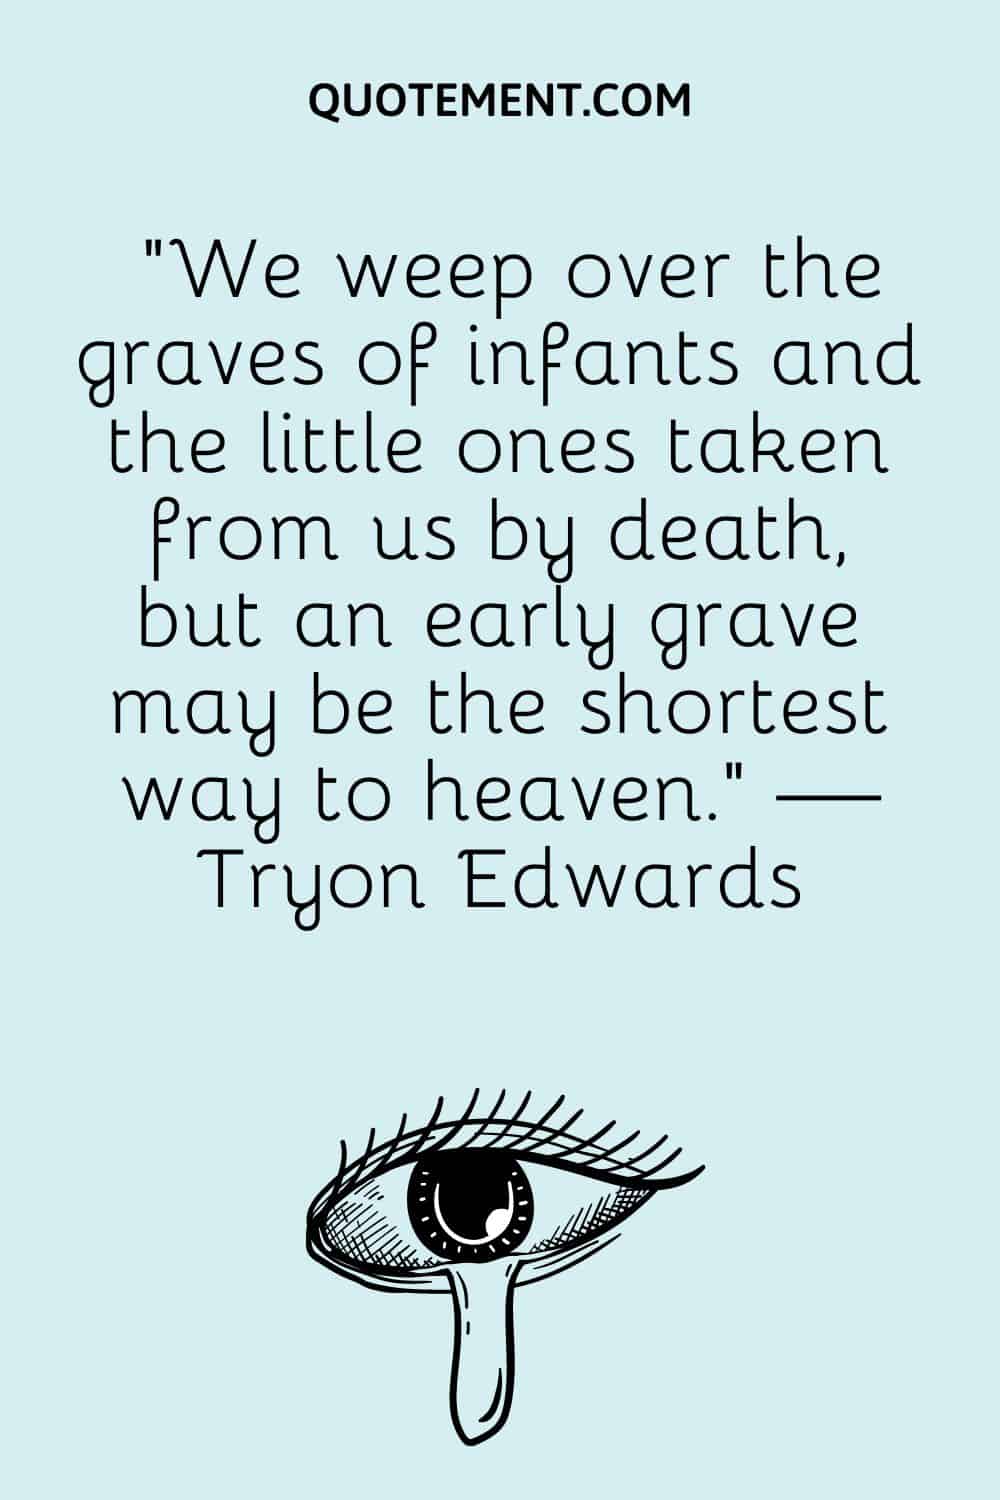 “We weep over the graves of infants and the little ones taken from us by death, but an early grave may be the shortest way to heaven.” — Tryon Edwards